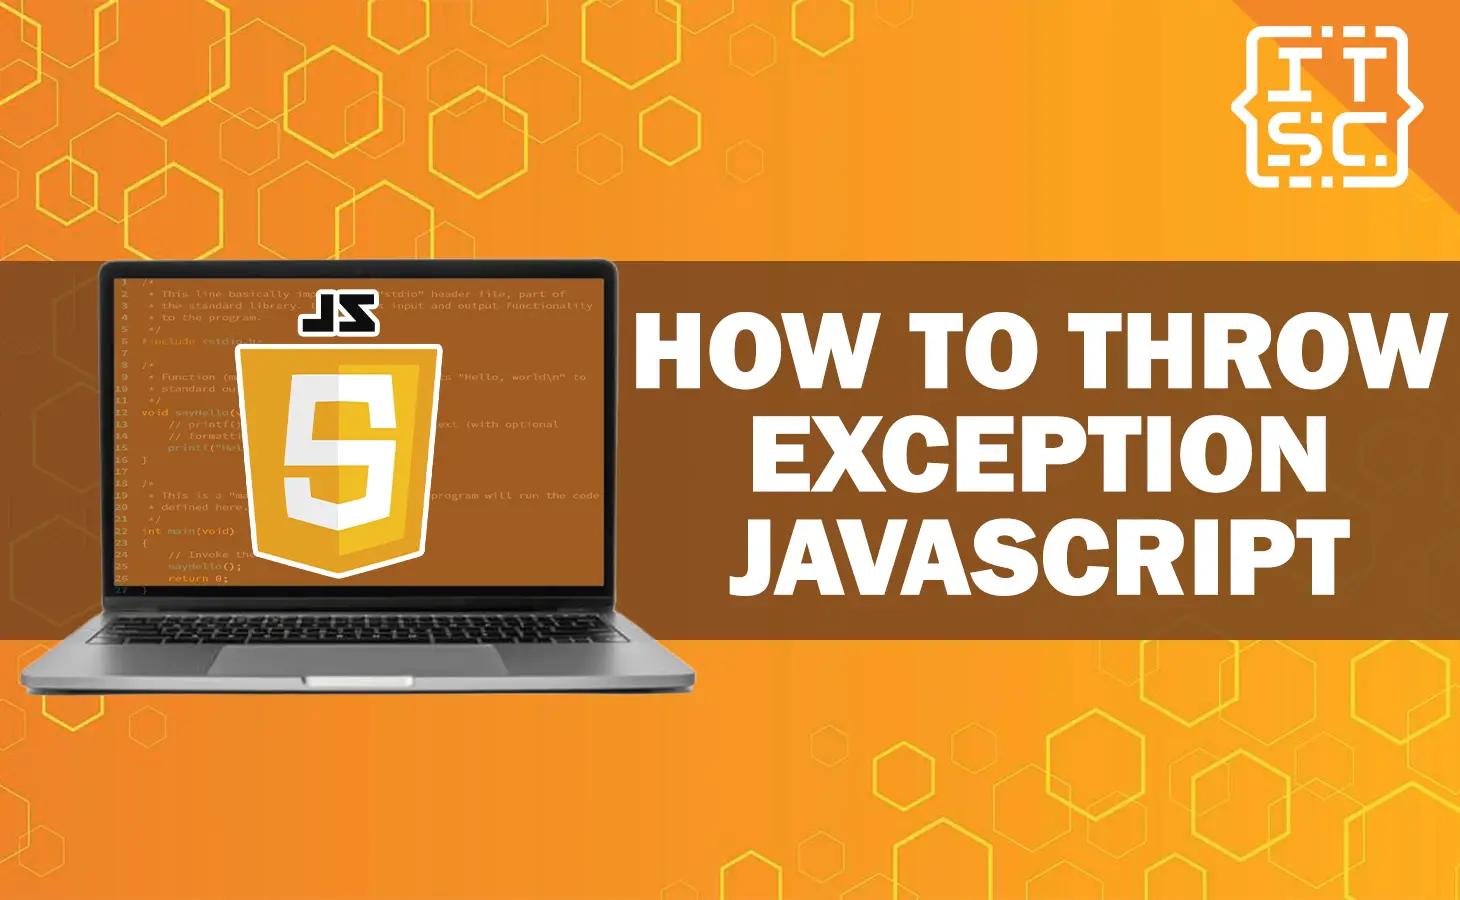 How to Throw Exception JavaScript